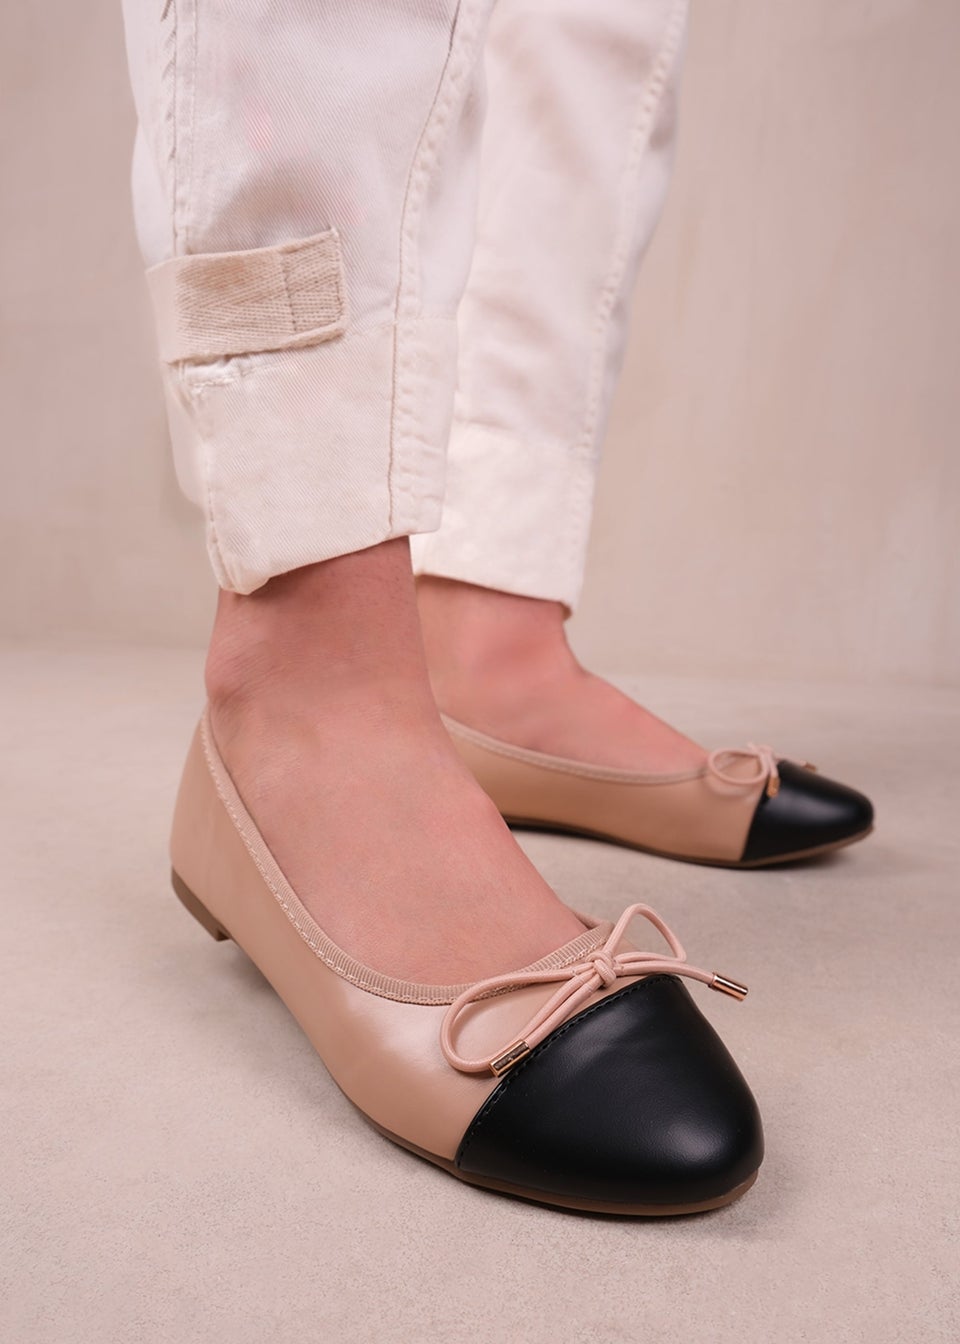 Where's That From Cream Janice Extra Wide PU Ballerina Flats